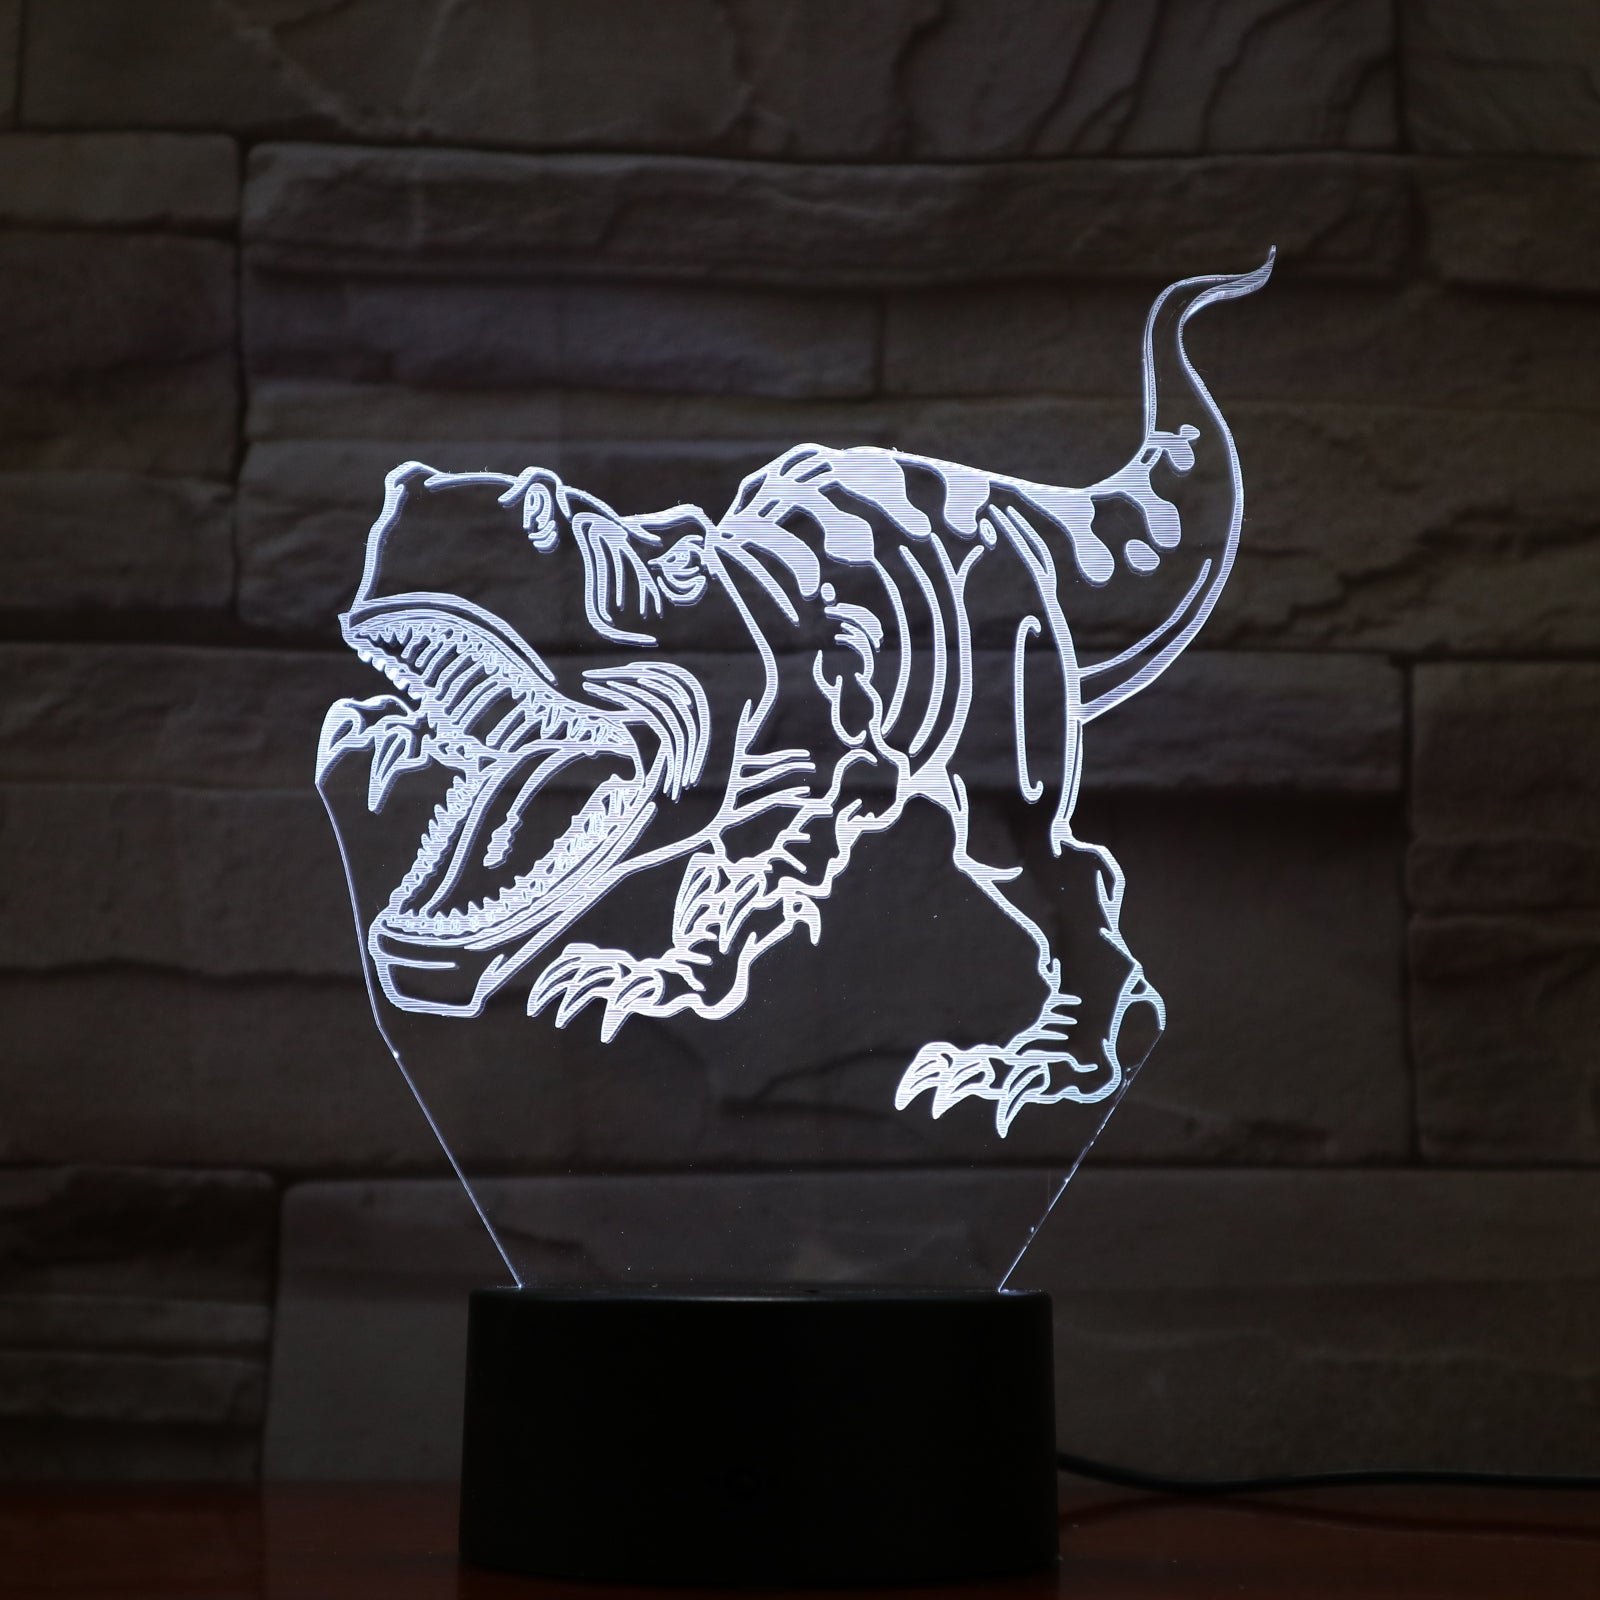 USB Dinosaur Lamp Novelty Touch Switch Desk LED Night Light 7 Colorful Table Acrylic Lampe Kids Christmas Toys Birth Gift 748